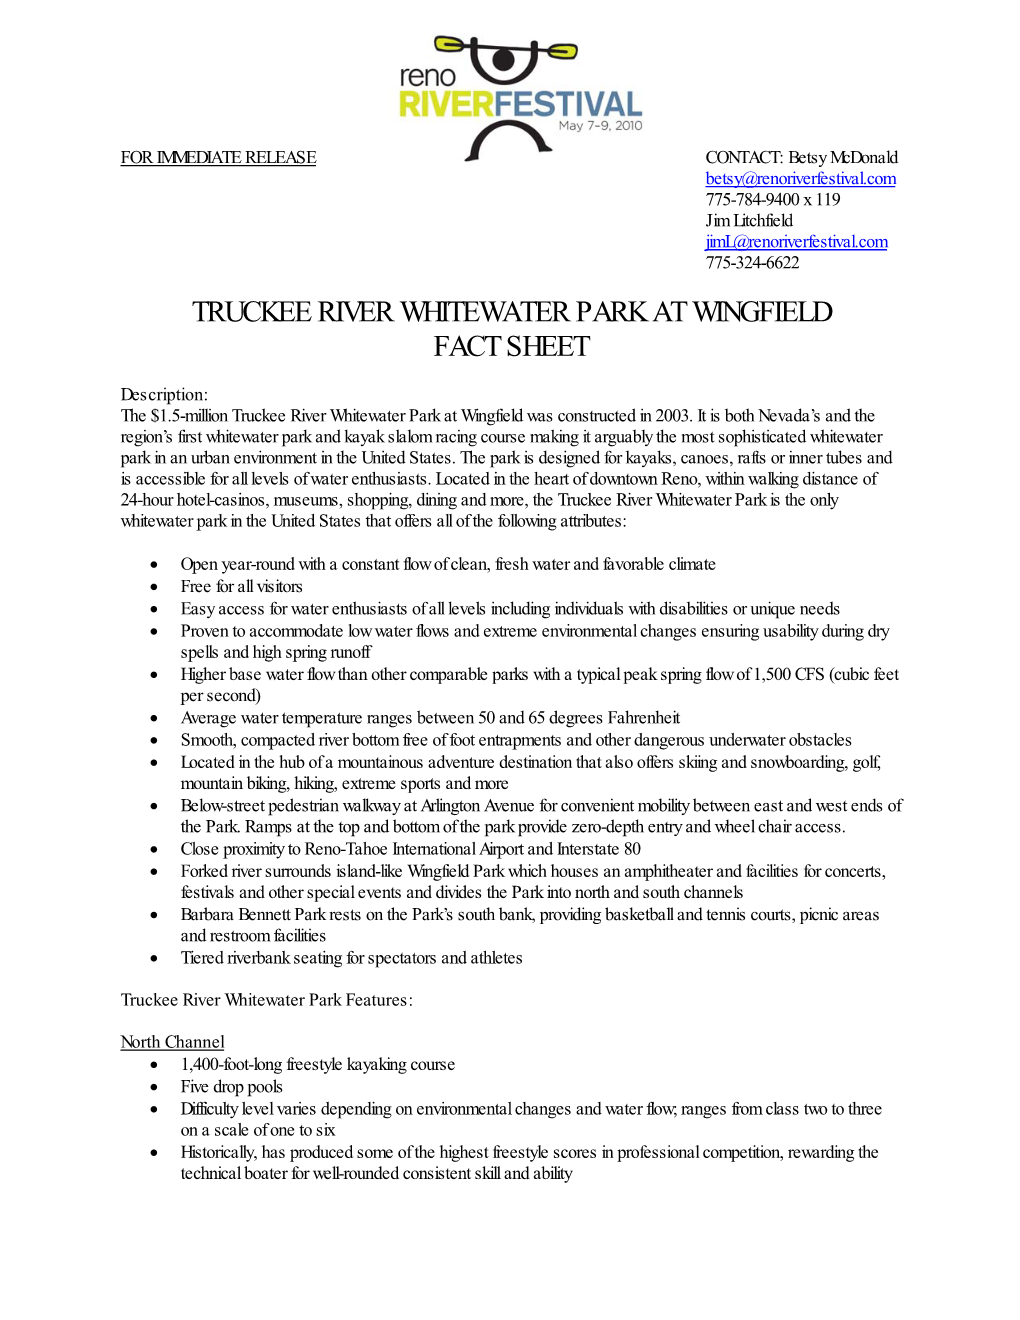 Truckee River Whitewater Park at Wingfield Fact Sheet